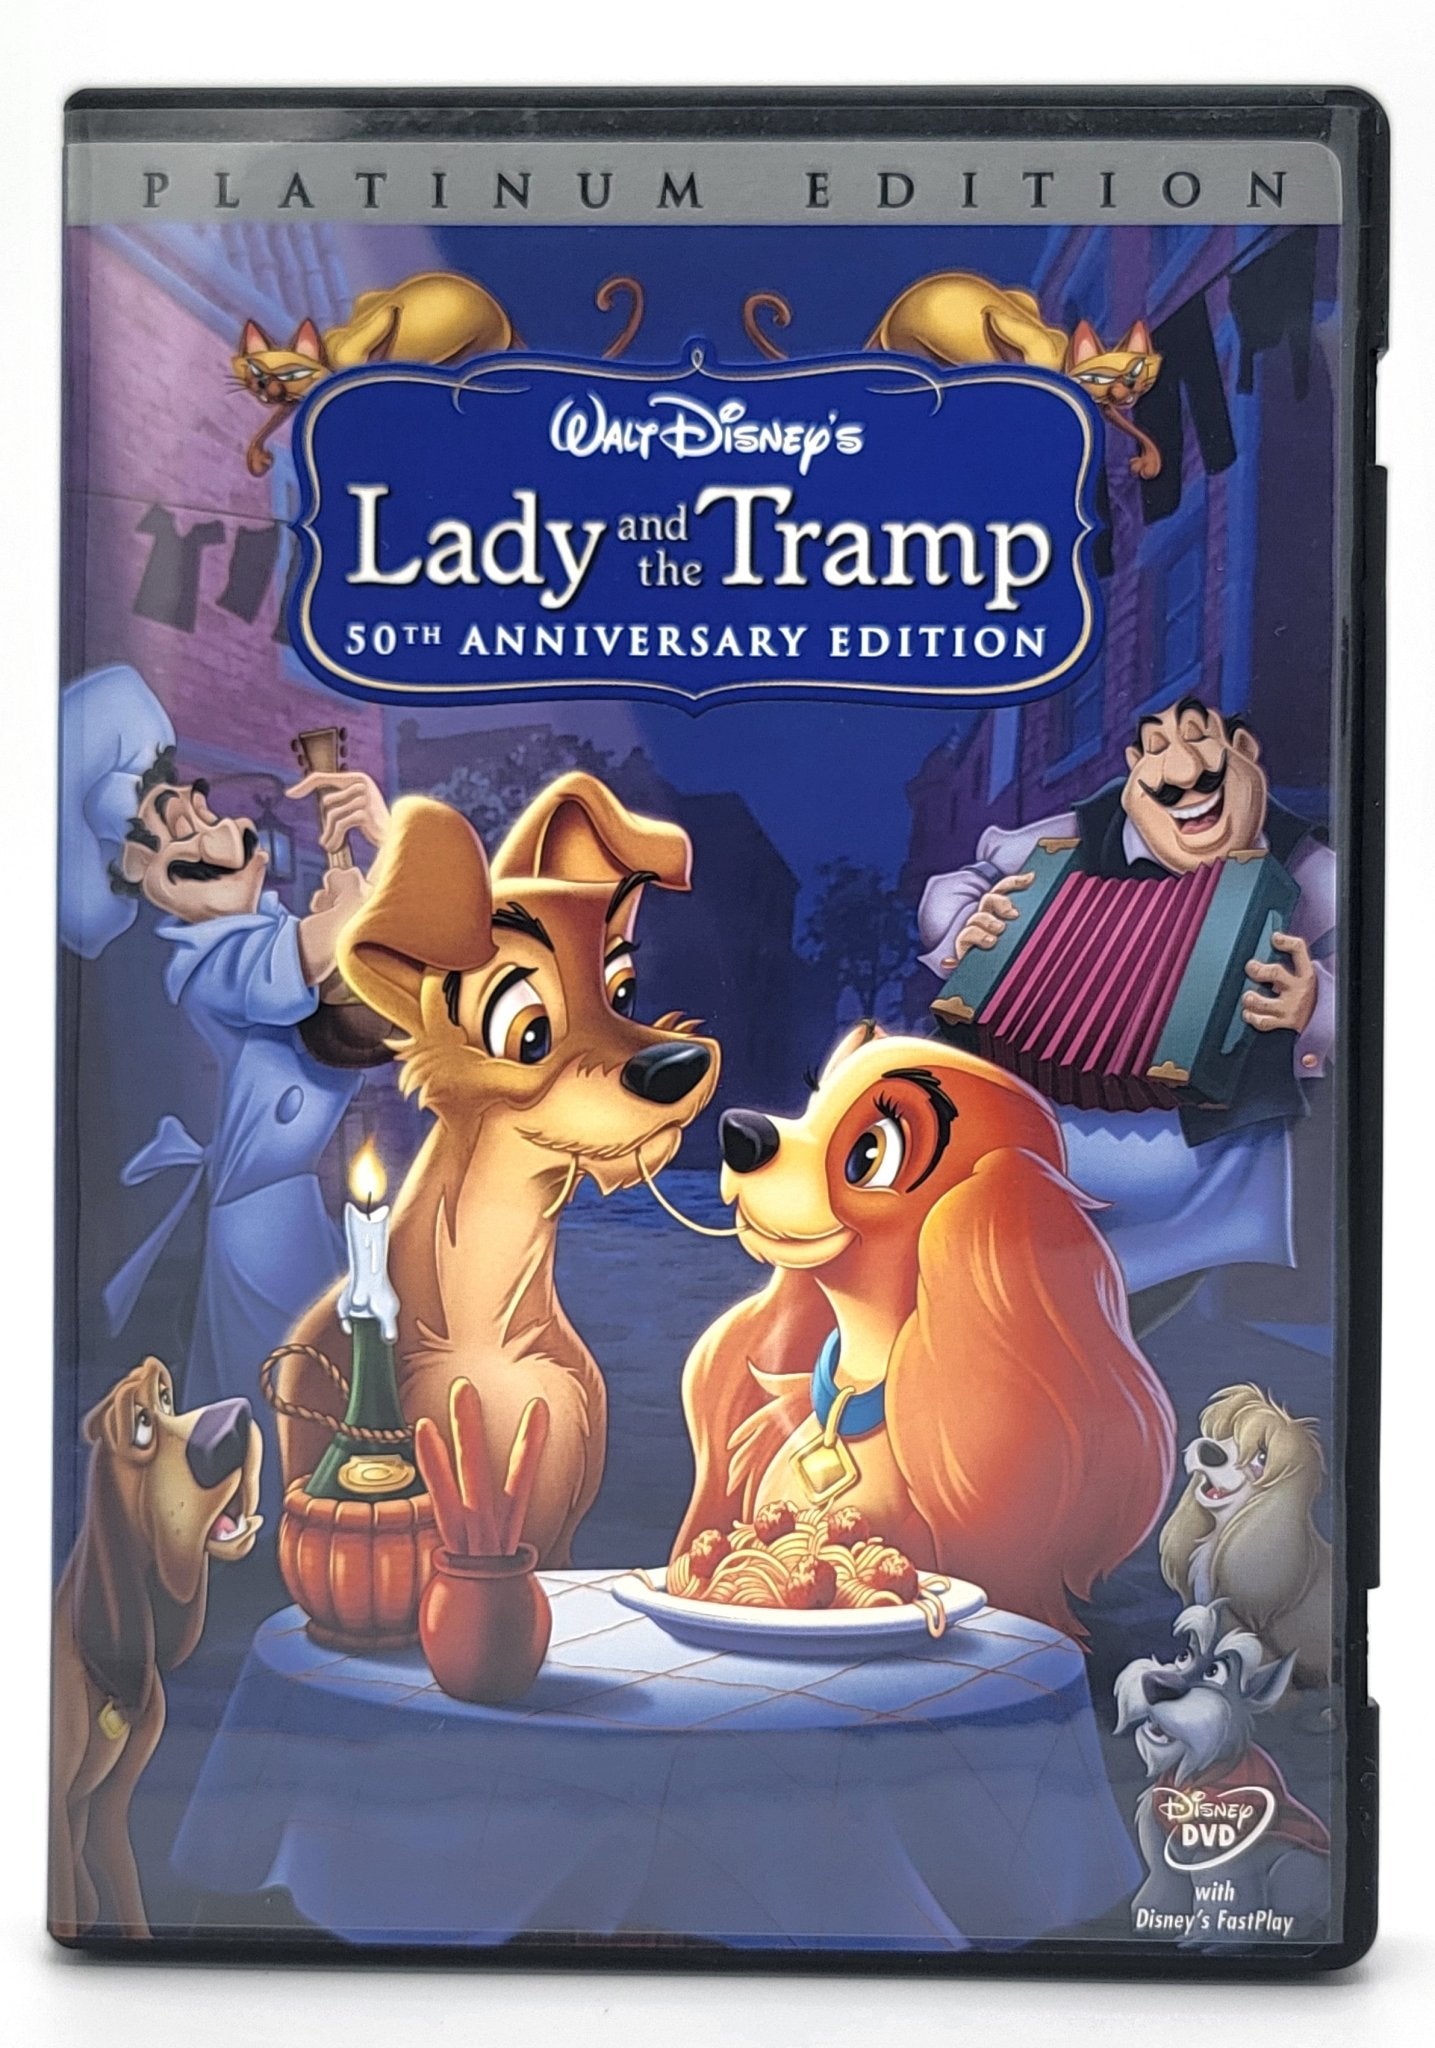 Walt Disney Home Entertainment - Lady and the Tramp - Platinum Edition | DVD | 50th Anniversary Edition - 2 Disc Set - DVD - Steady Bunny Shop